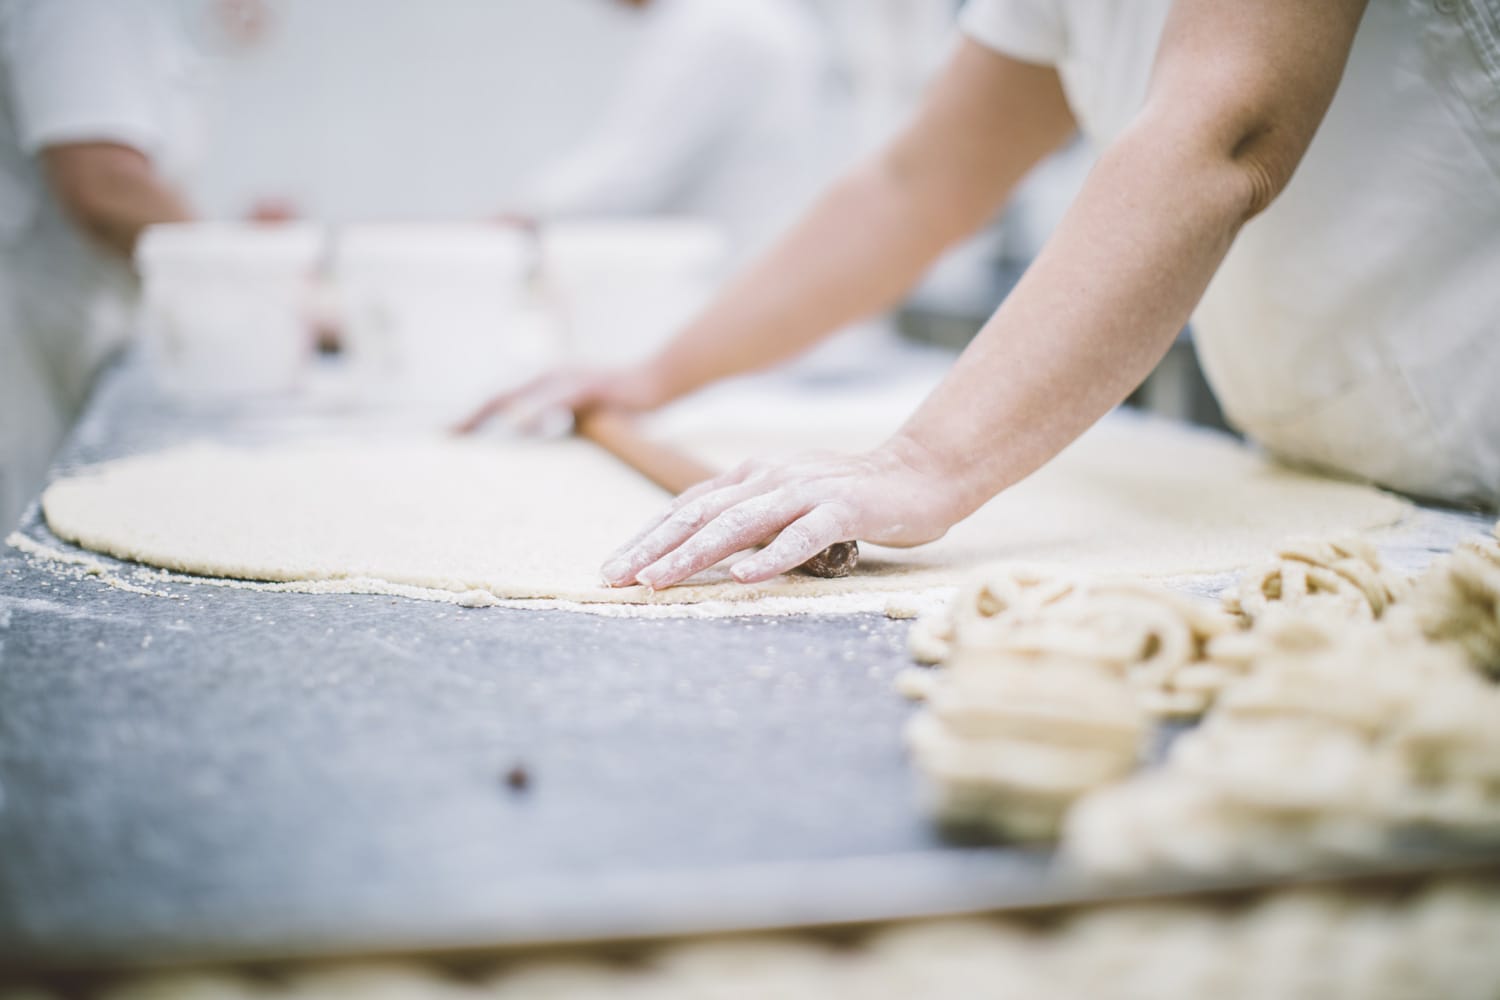 Women making puff pastry in professional kitchen